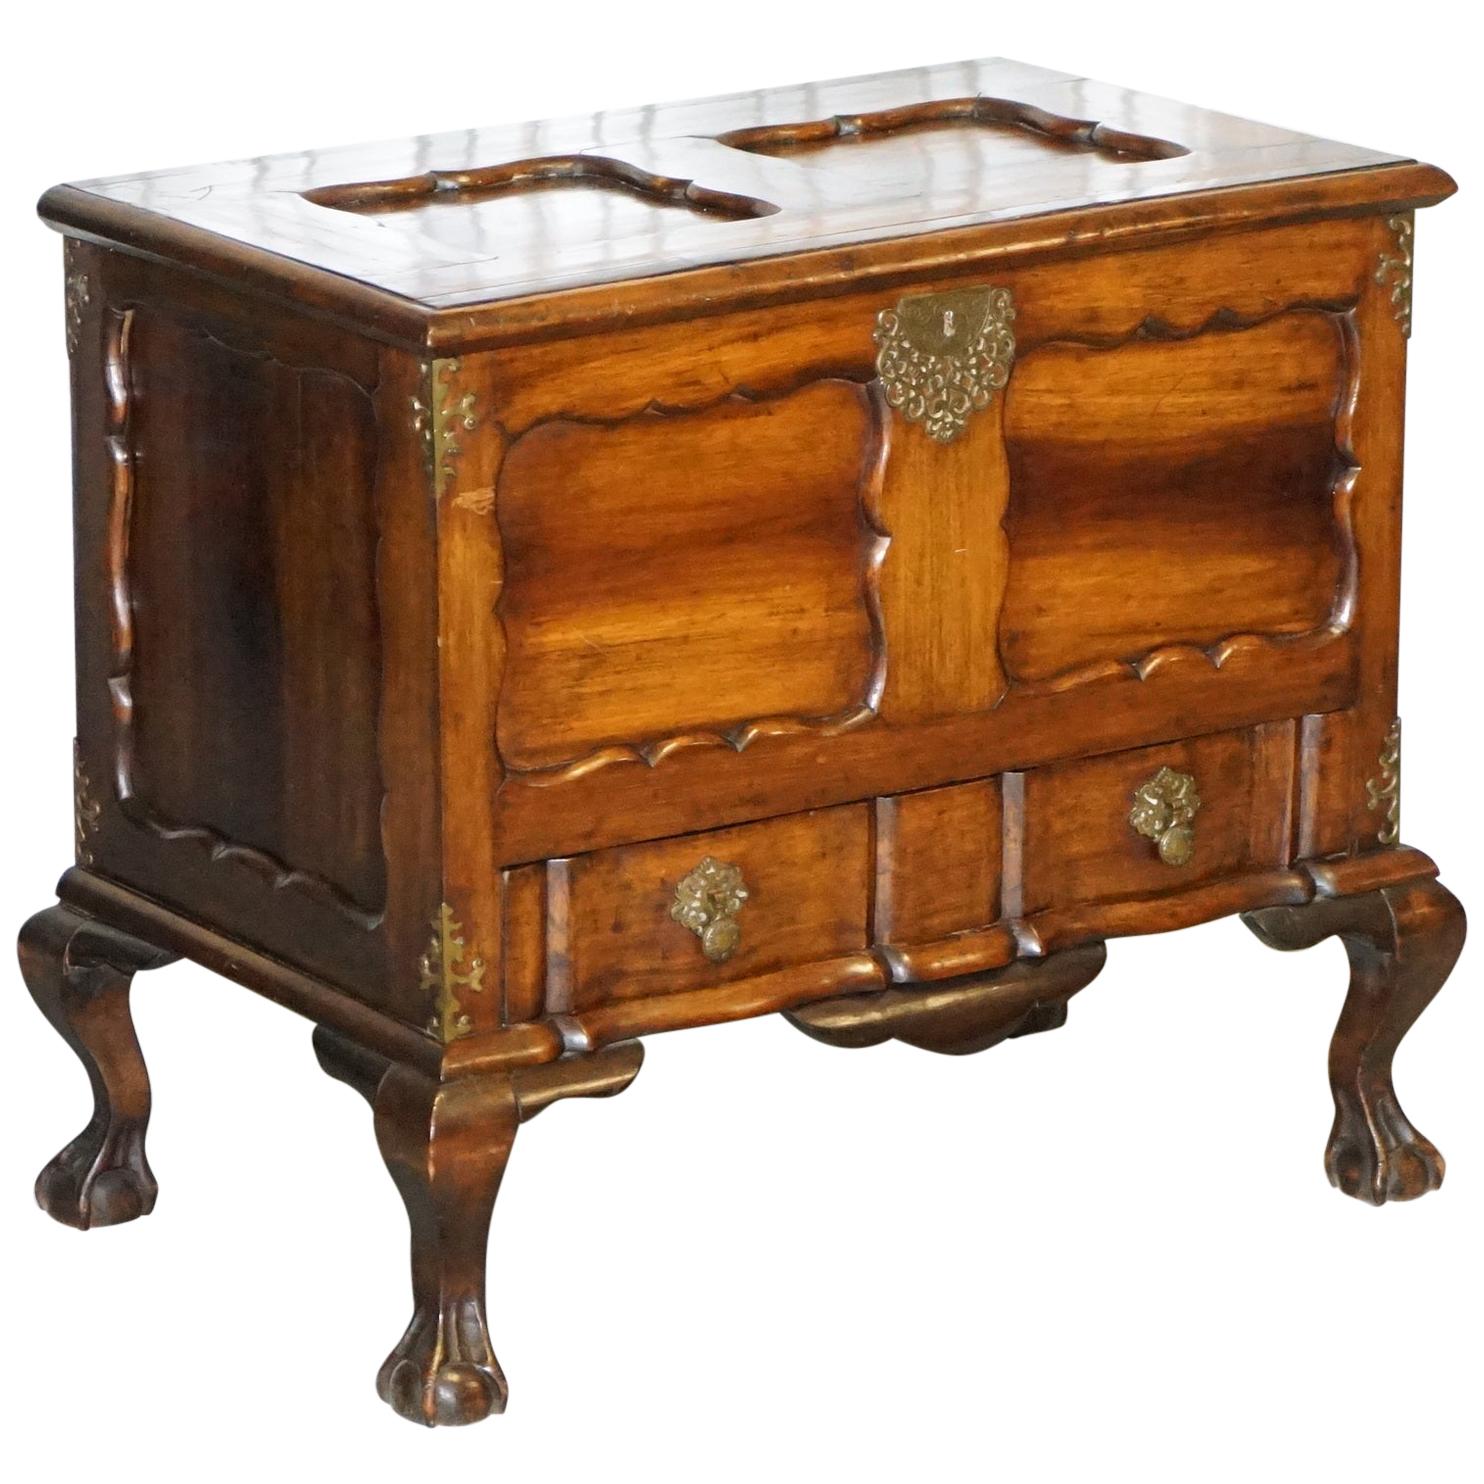 Lovely Vintage Hardwood Ornately Carved Trunk Chest with Drawer Claw & Ball Legs For Sale